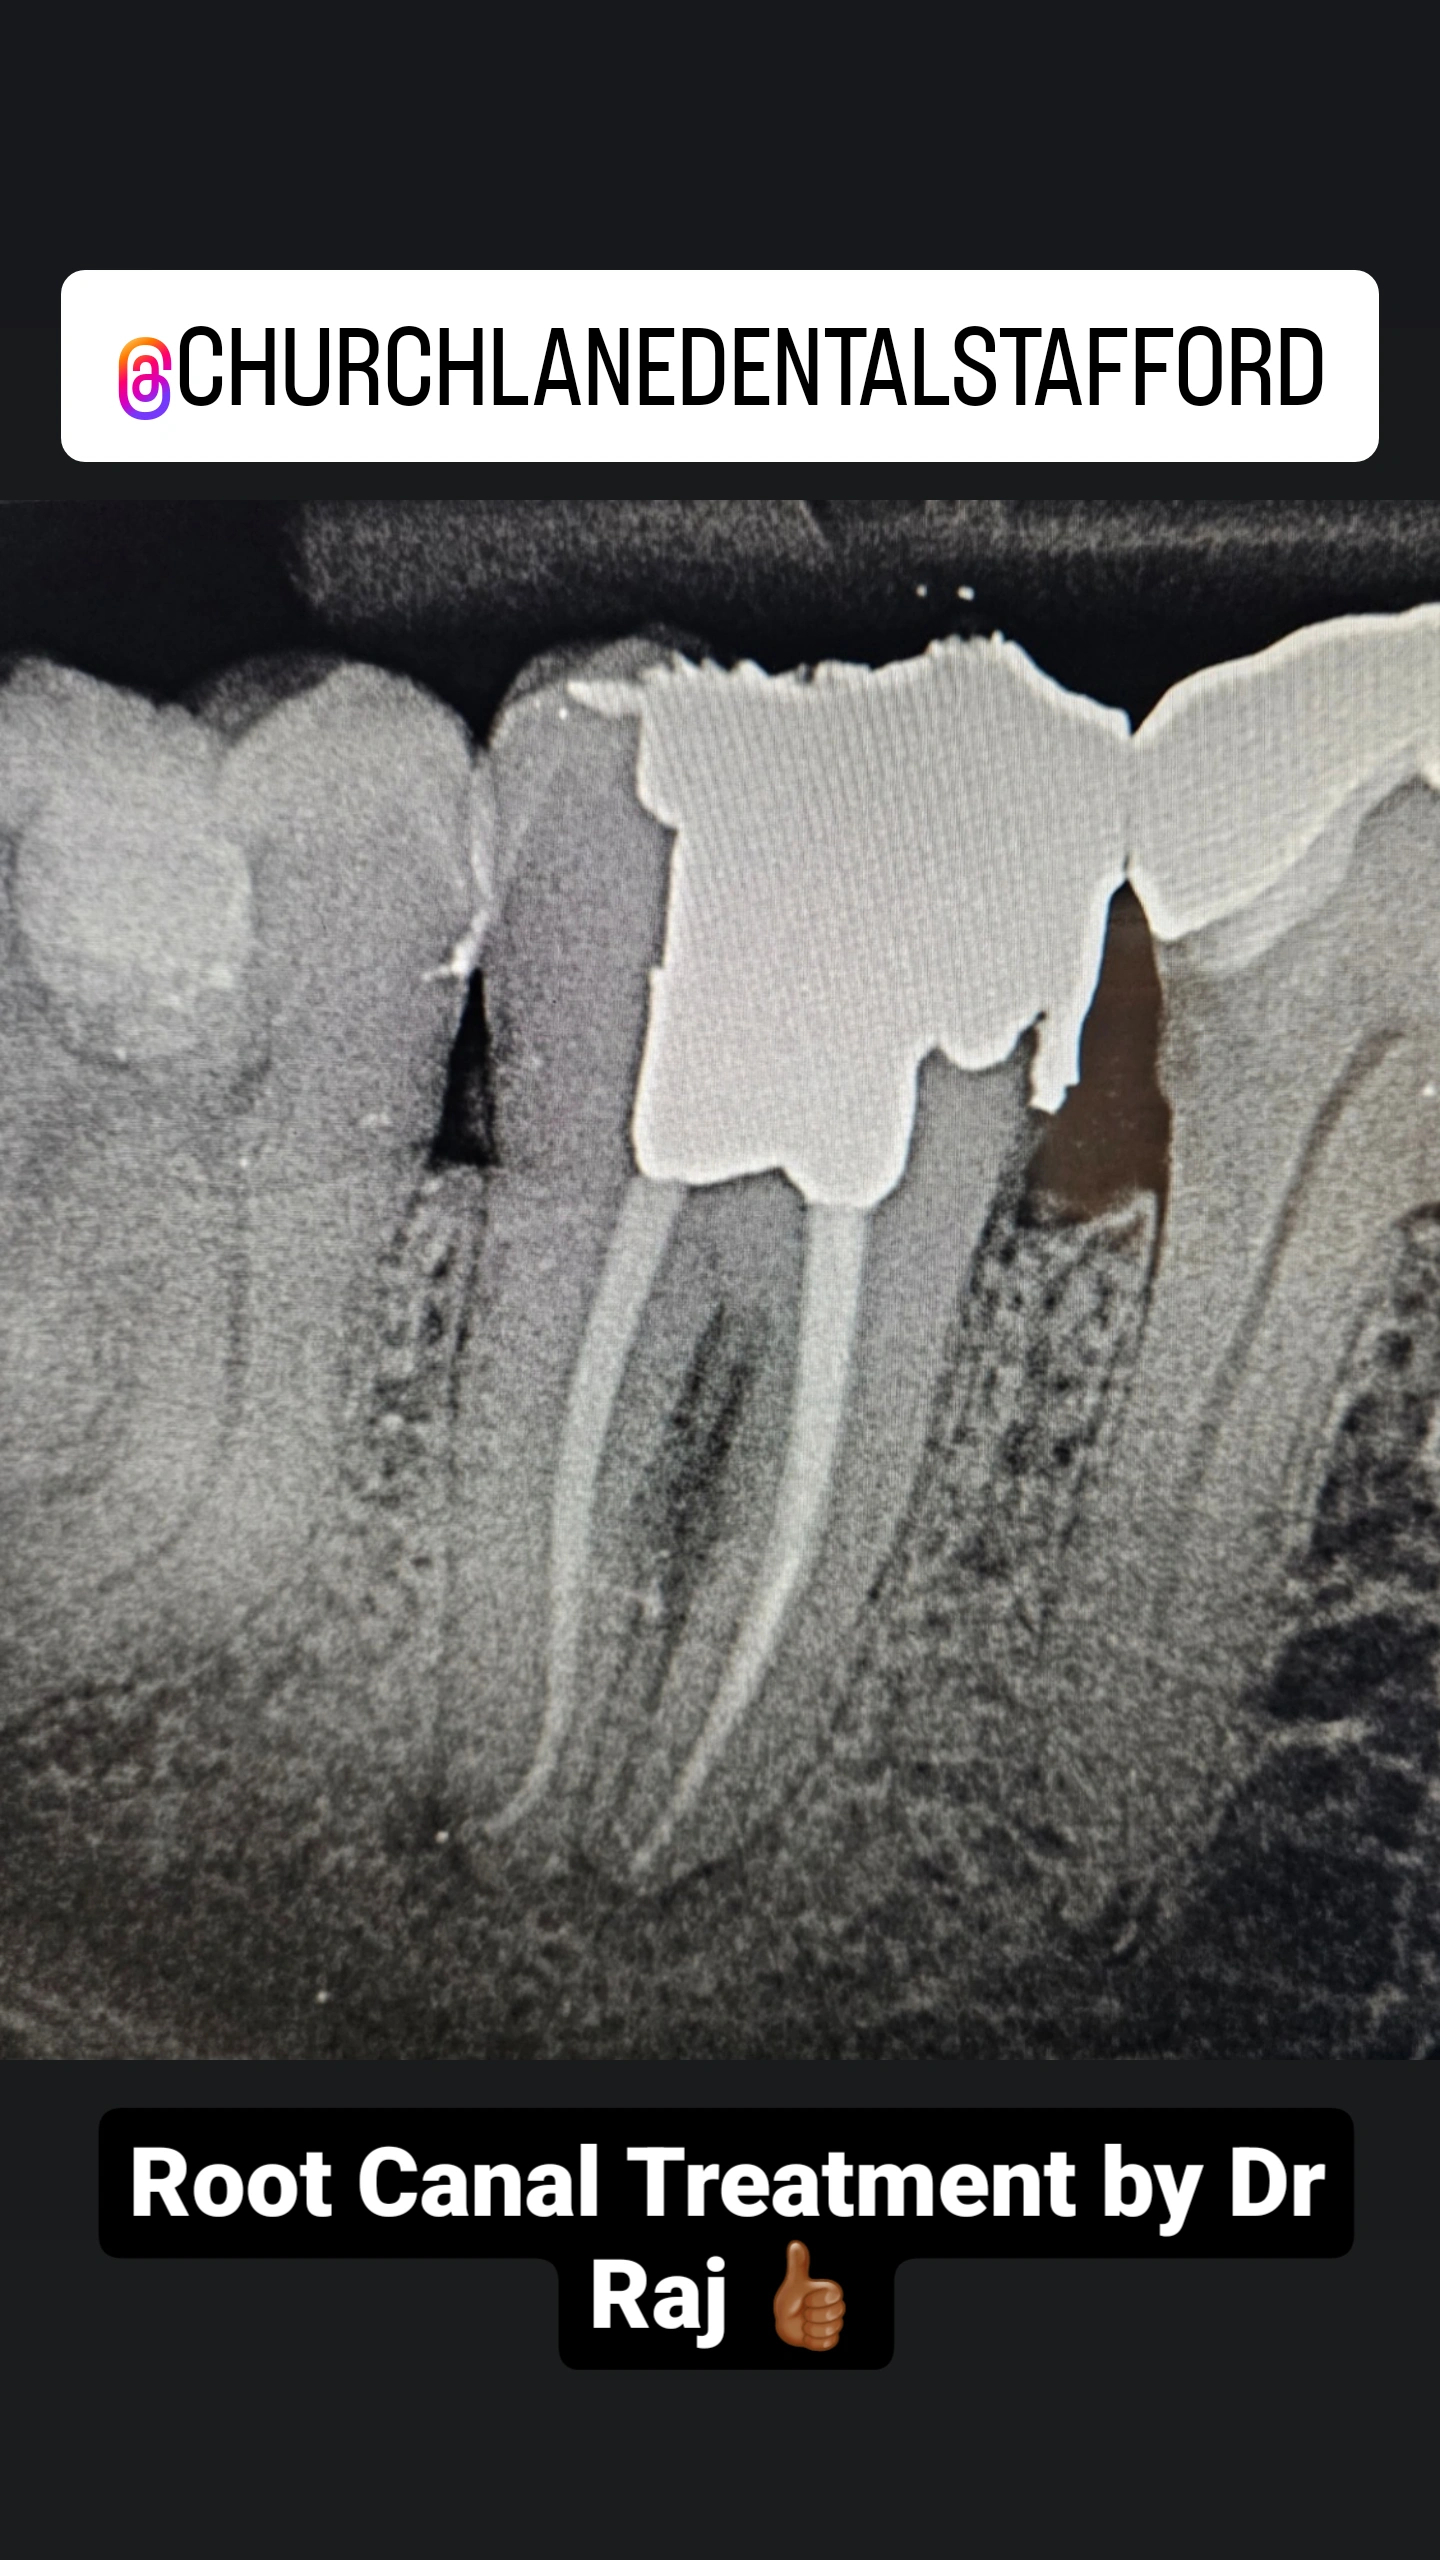 Root Canal Image.jpg